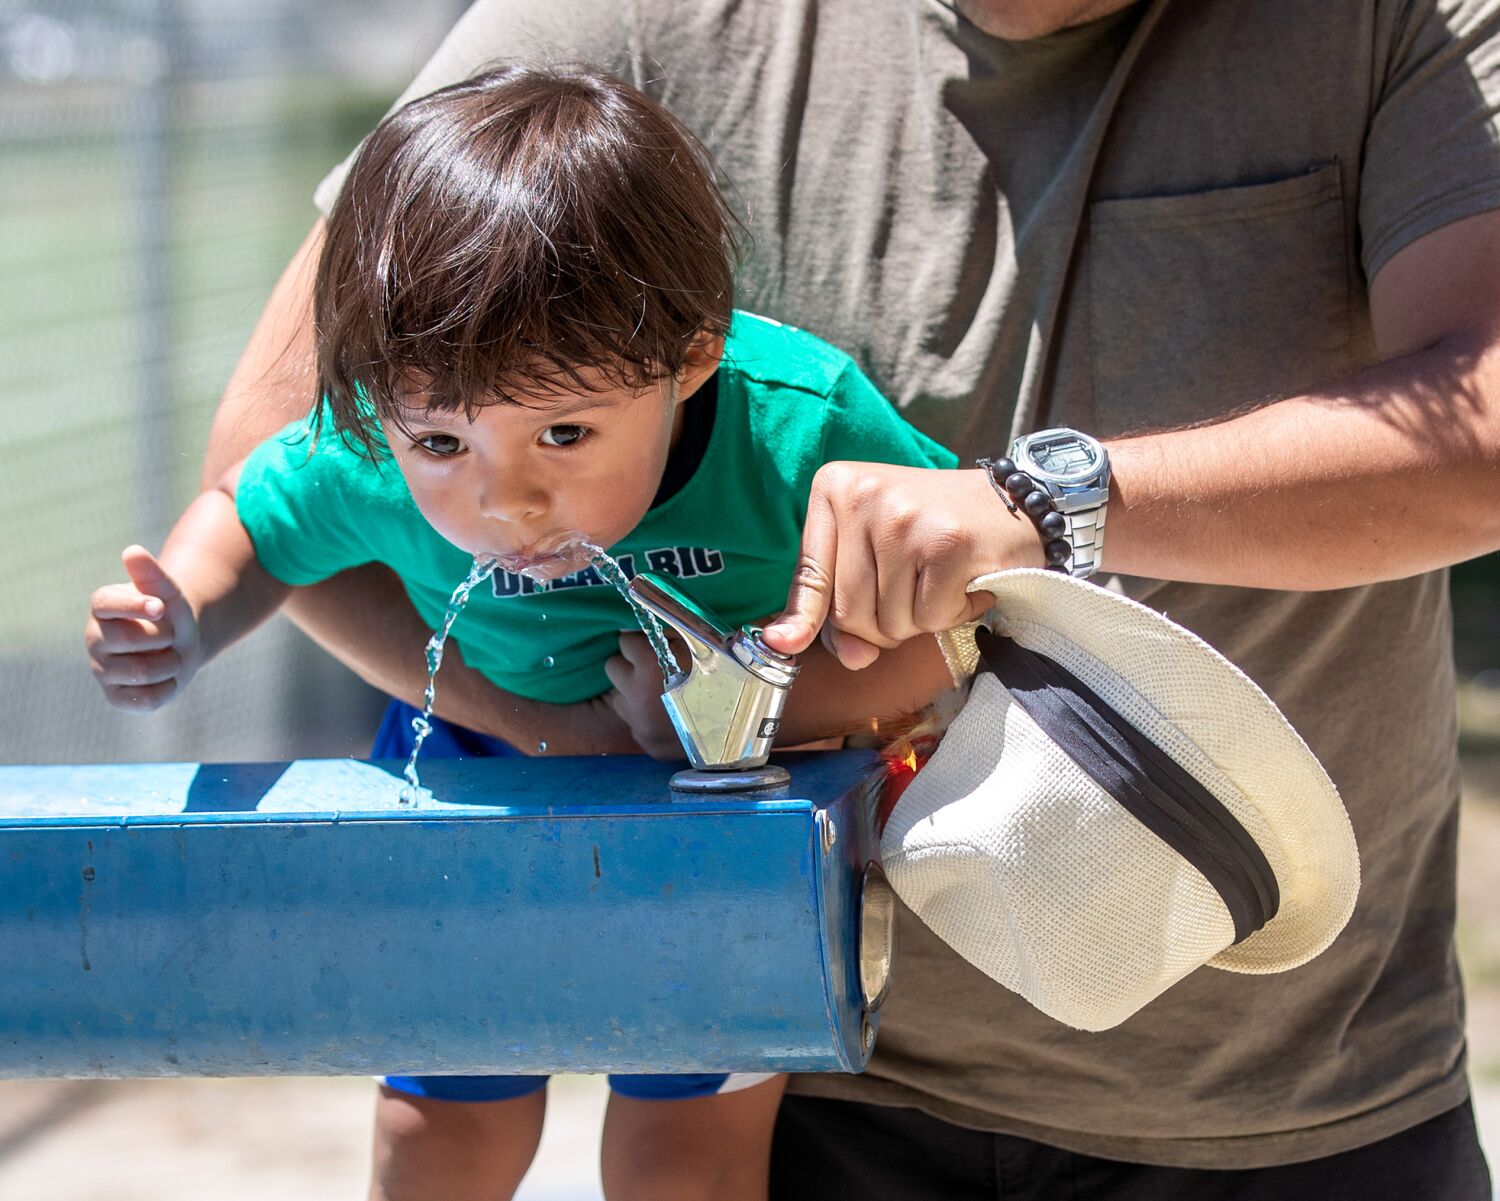 Summer heat is especially dangerous for babies and toddlers. Here's how to protect them.